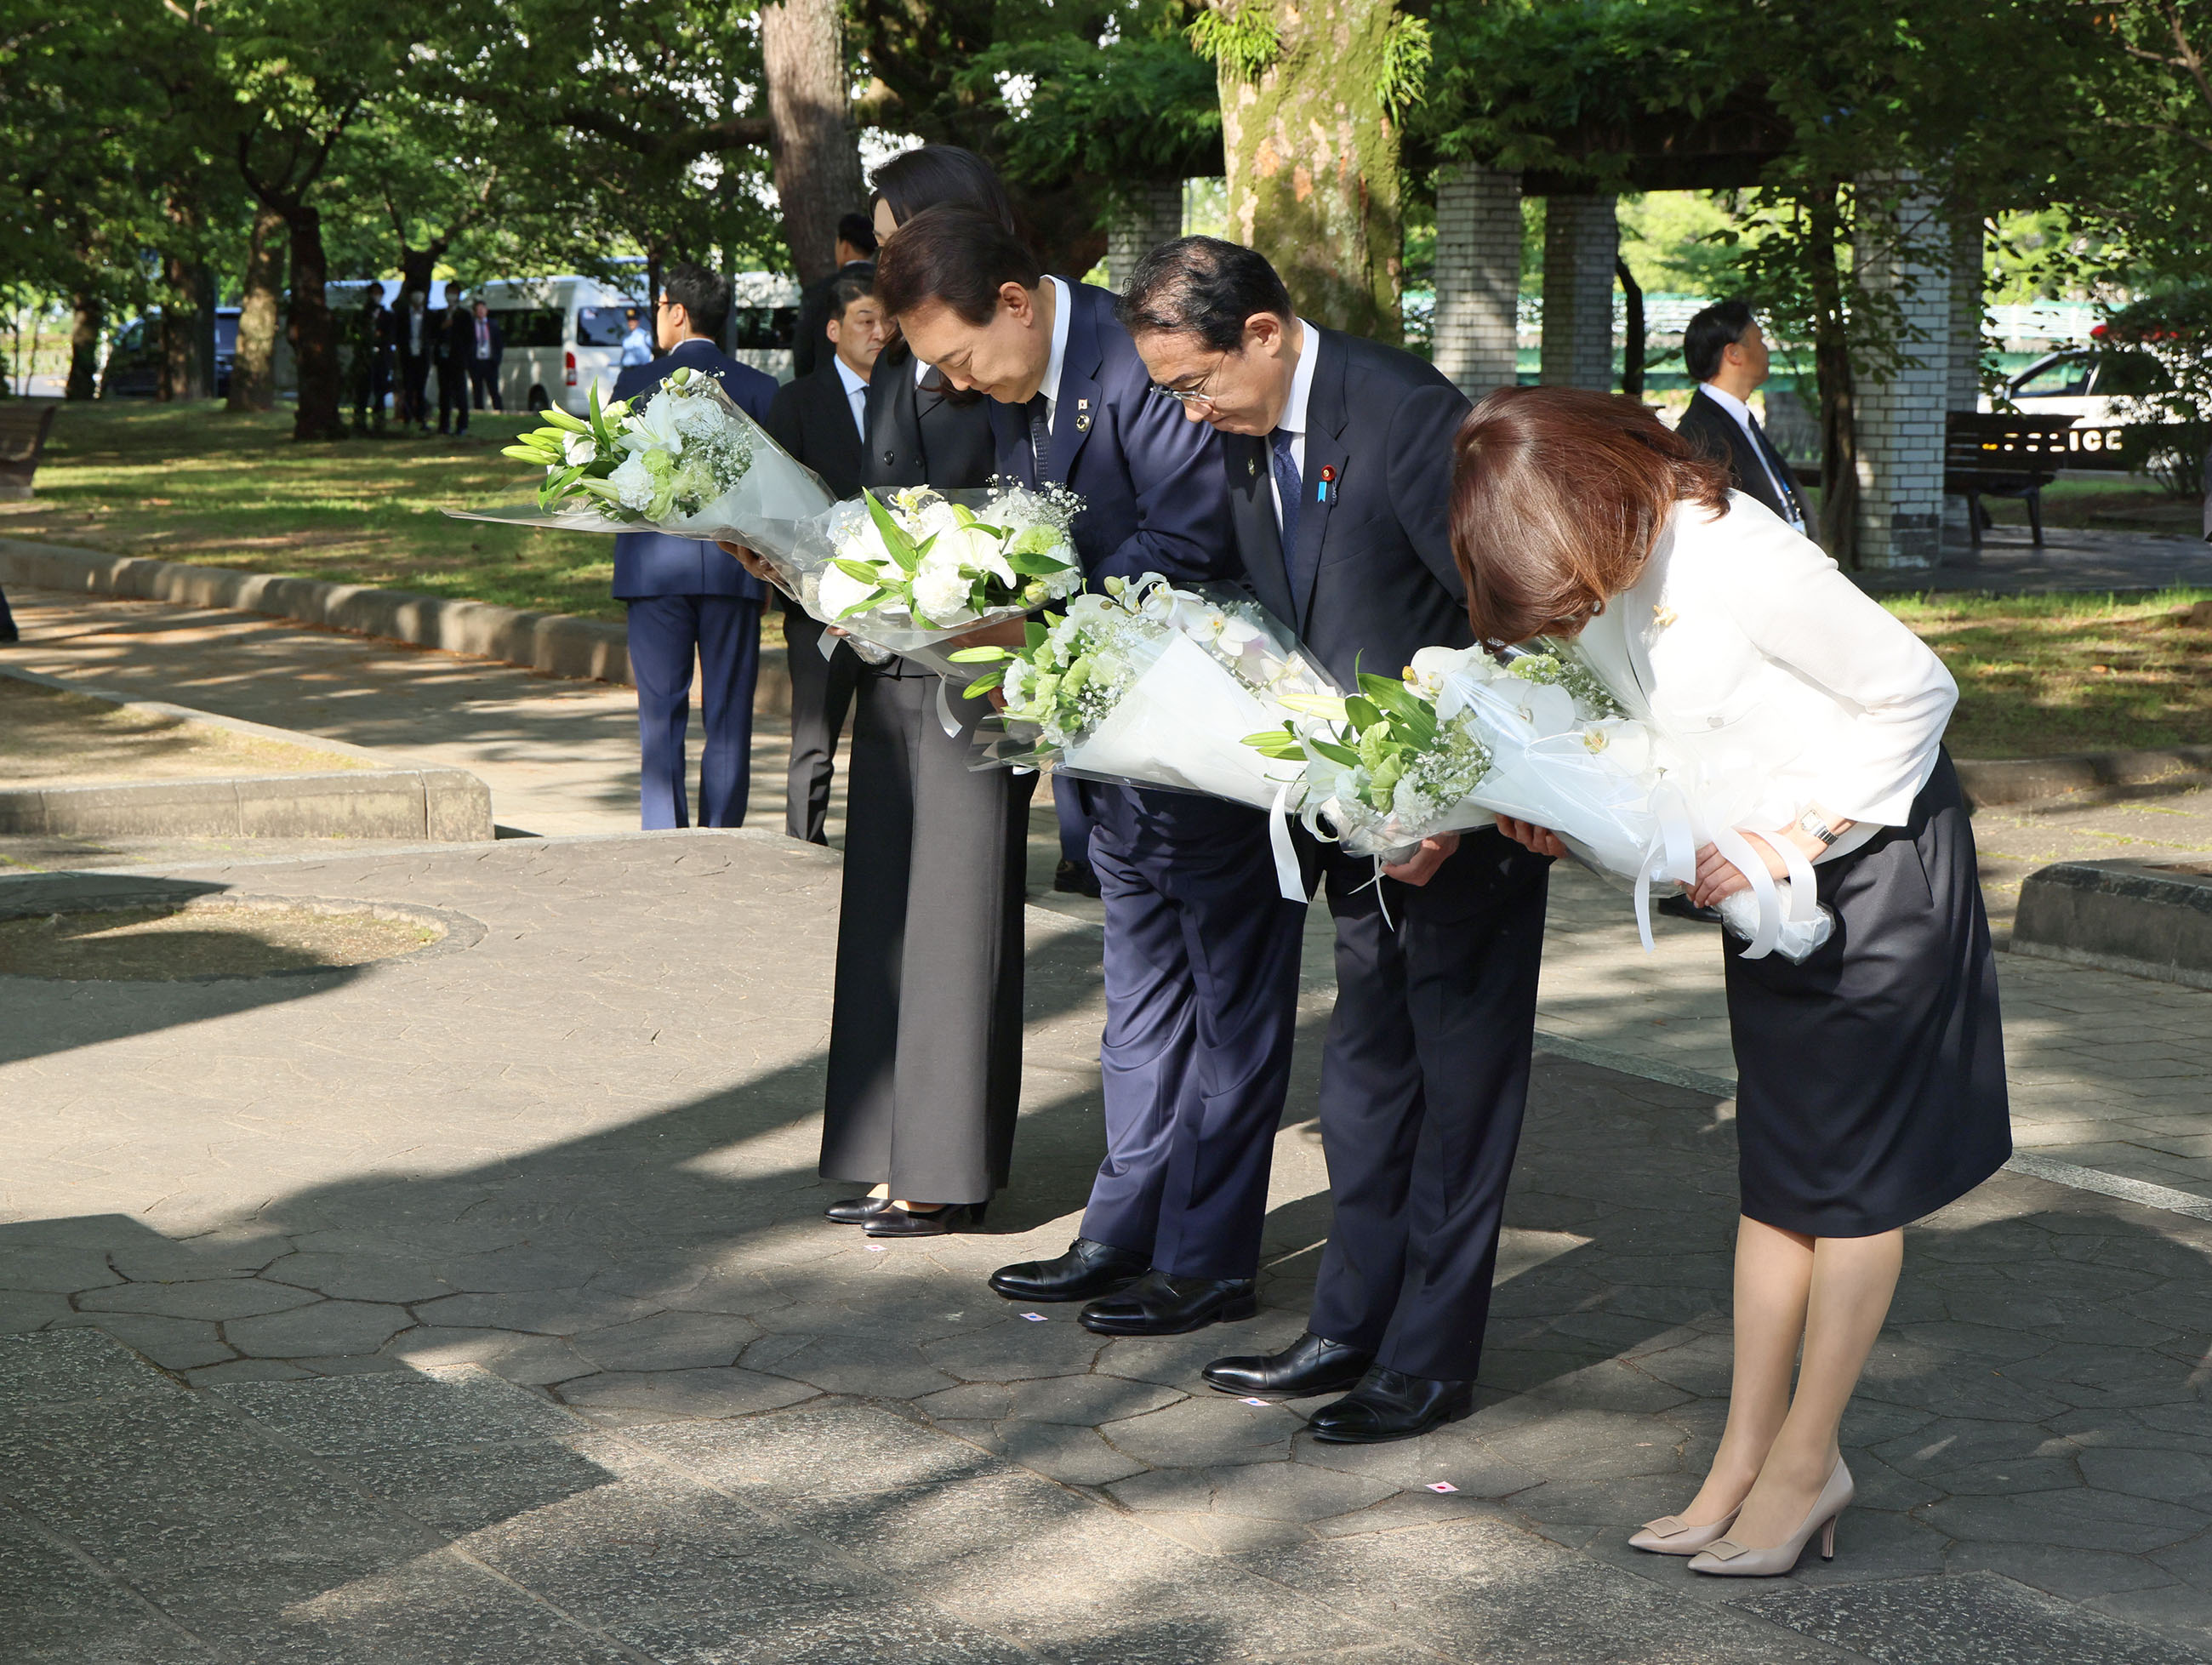 Prime Minister Kishida laying flowers at the Cenotaph for the ROK Atomic Bomb Victims (3)